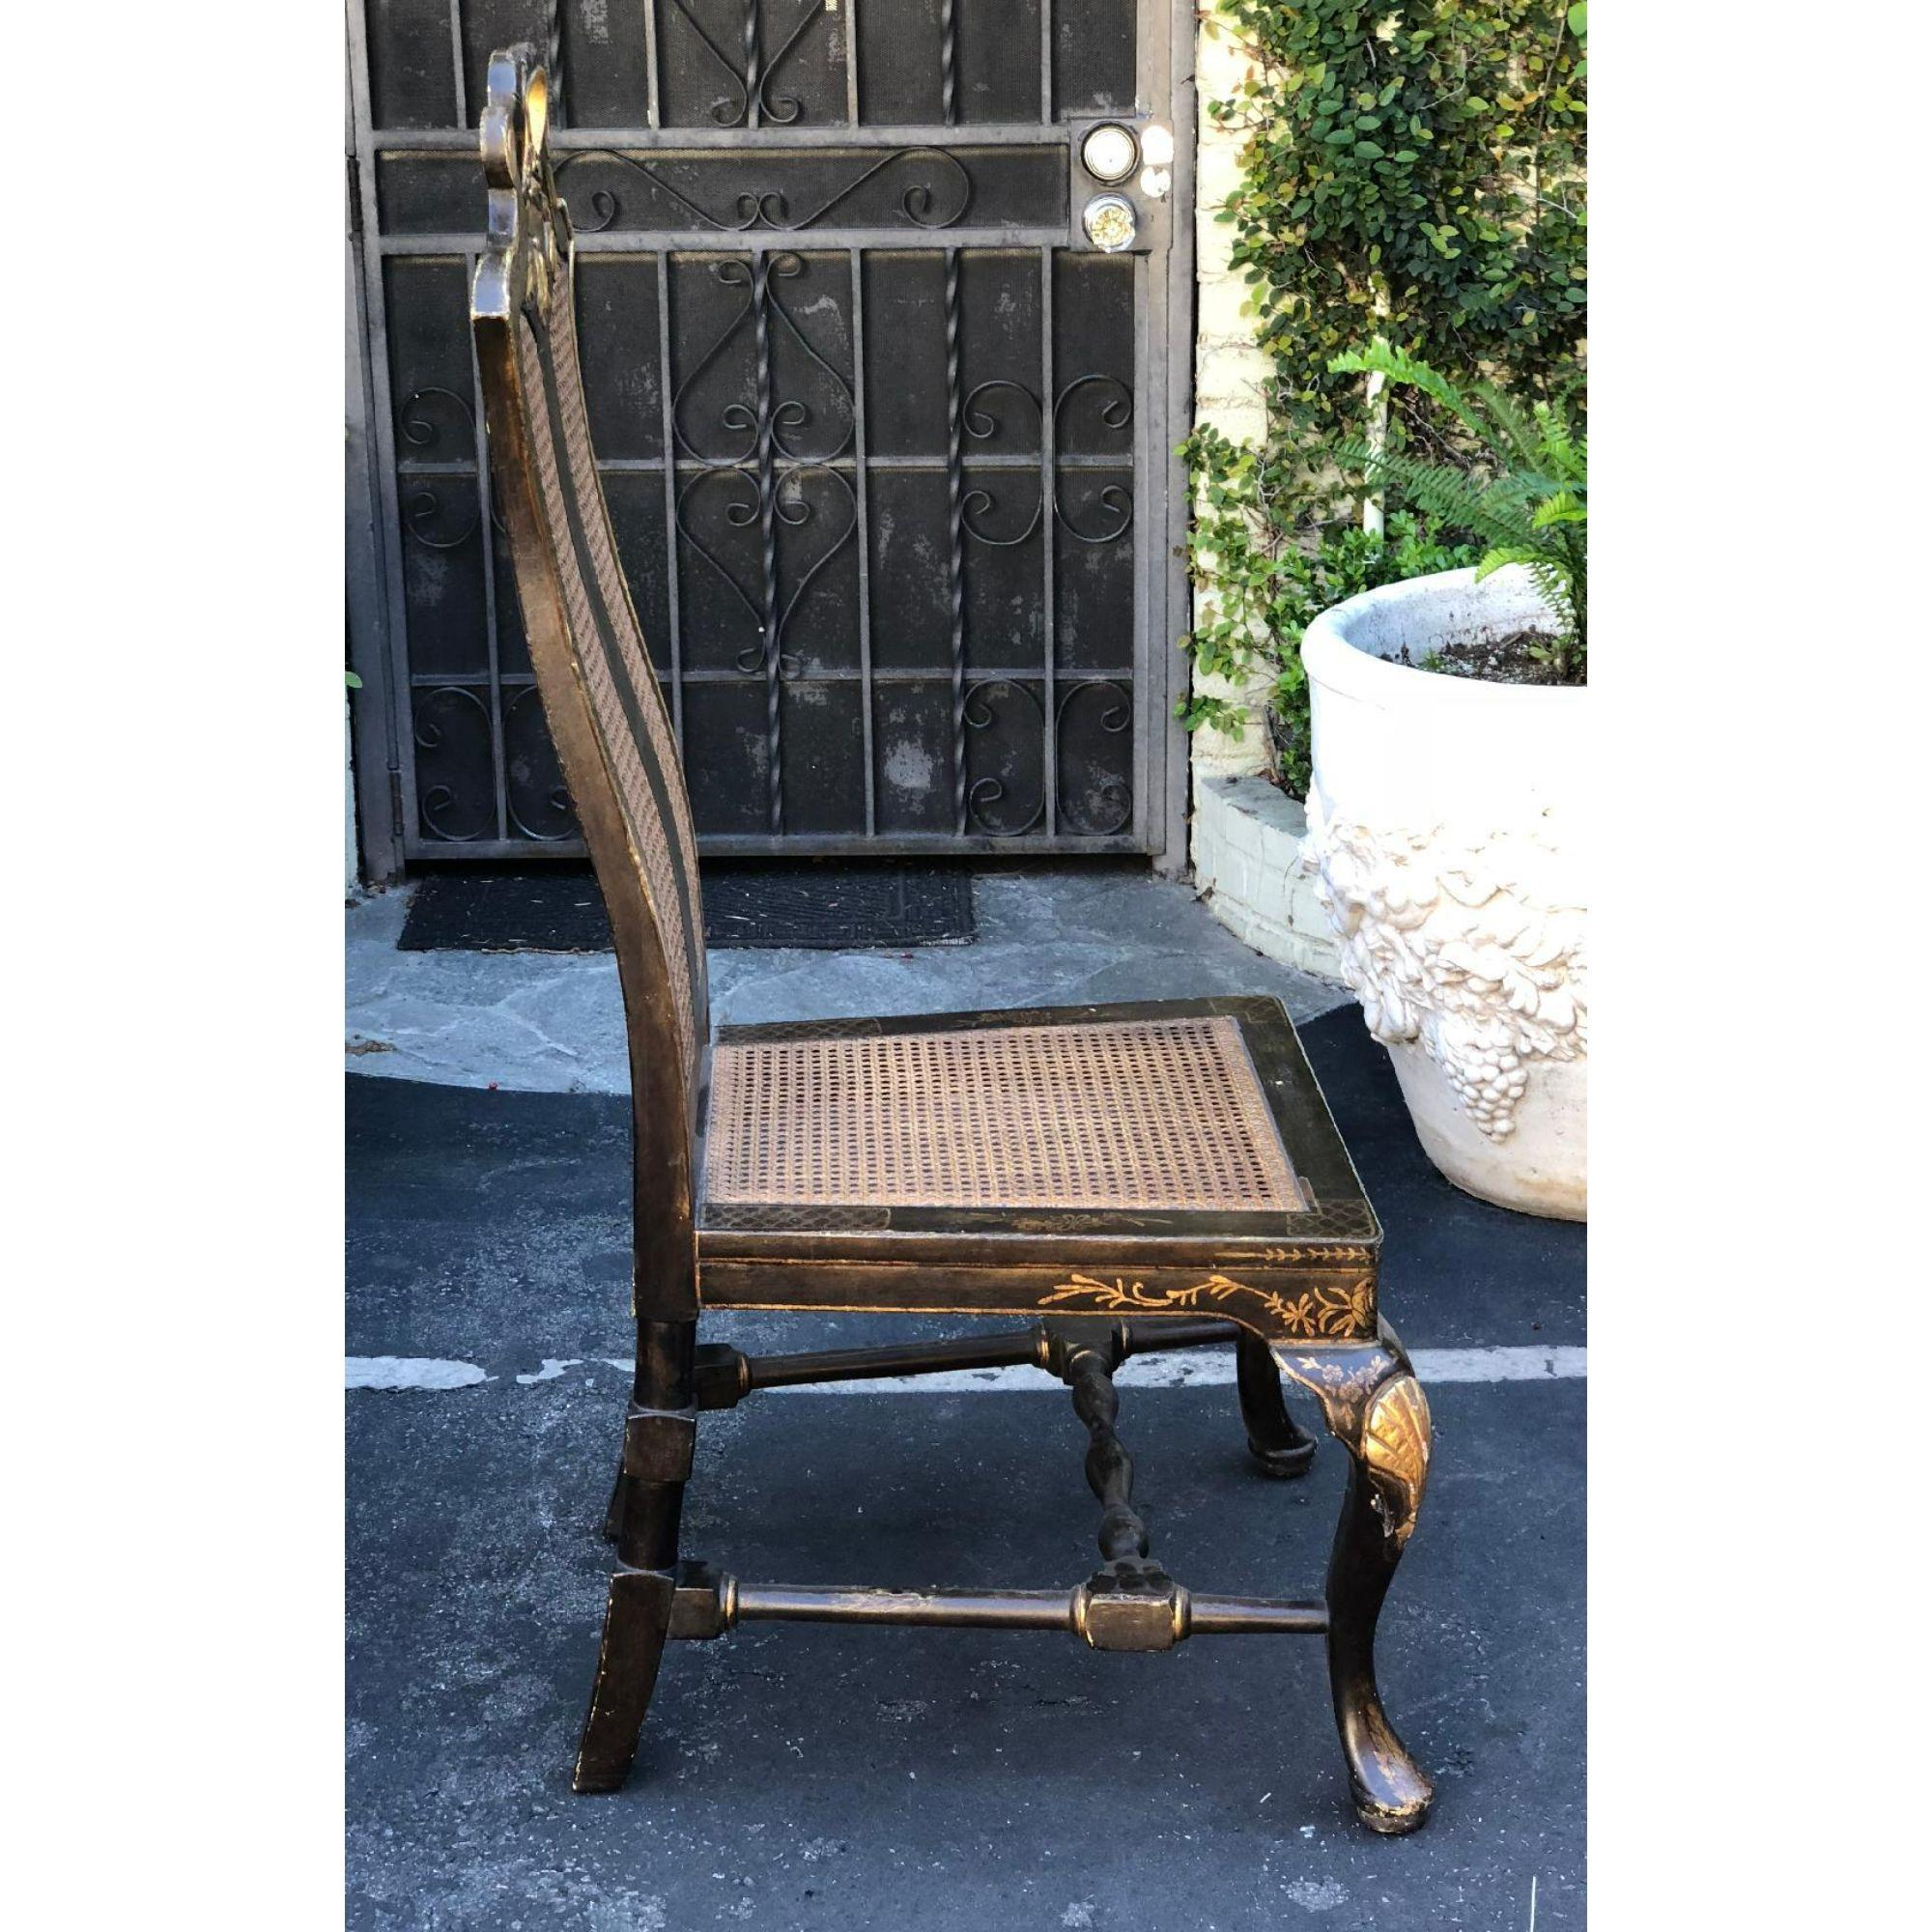 Chinese Chippendale Chinoiserie decorated side chair by Charles Pollock

Additional information: 
Materials: Caning, Lacquer
Color: Black
Brand: Charles Pollock
Period: 2010s
Place of Origin: North America
Styles: Chinese, Chinoiserie,